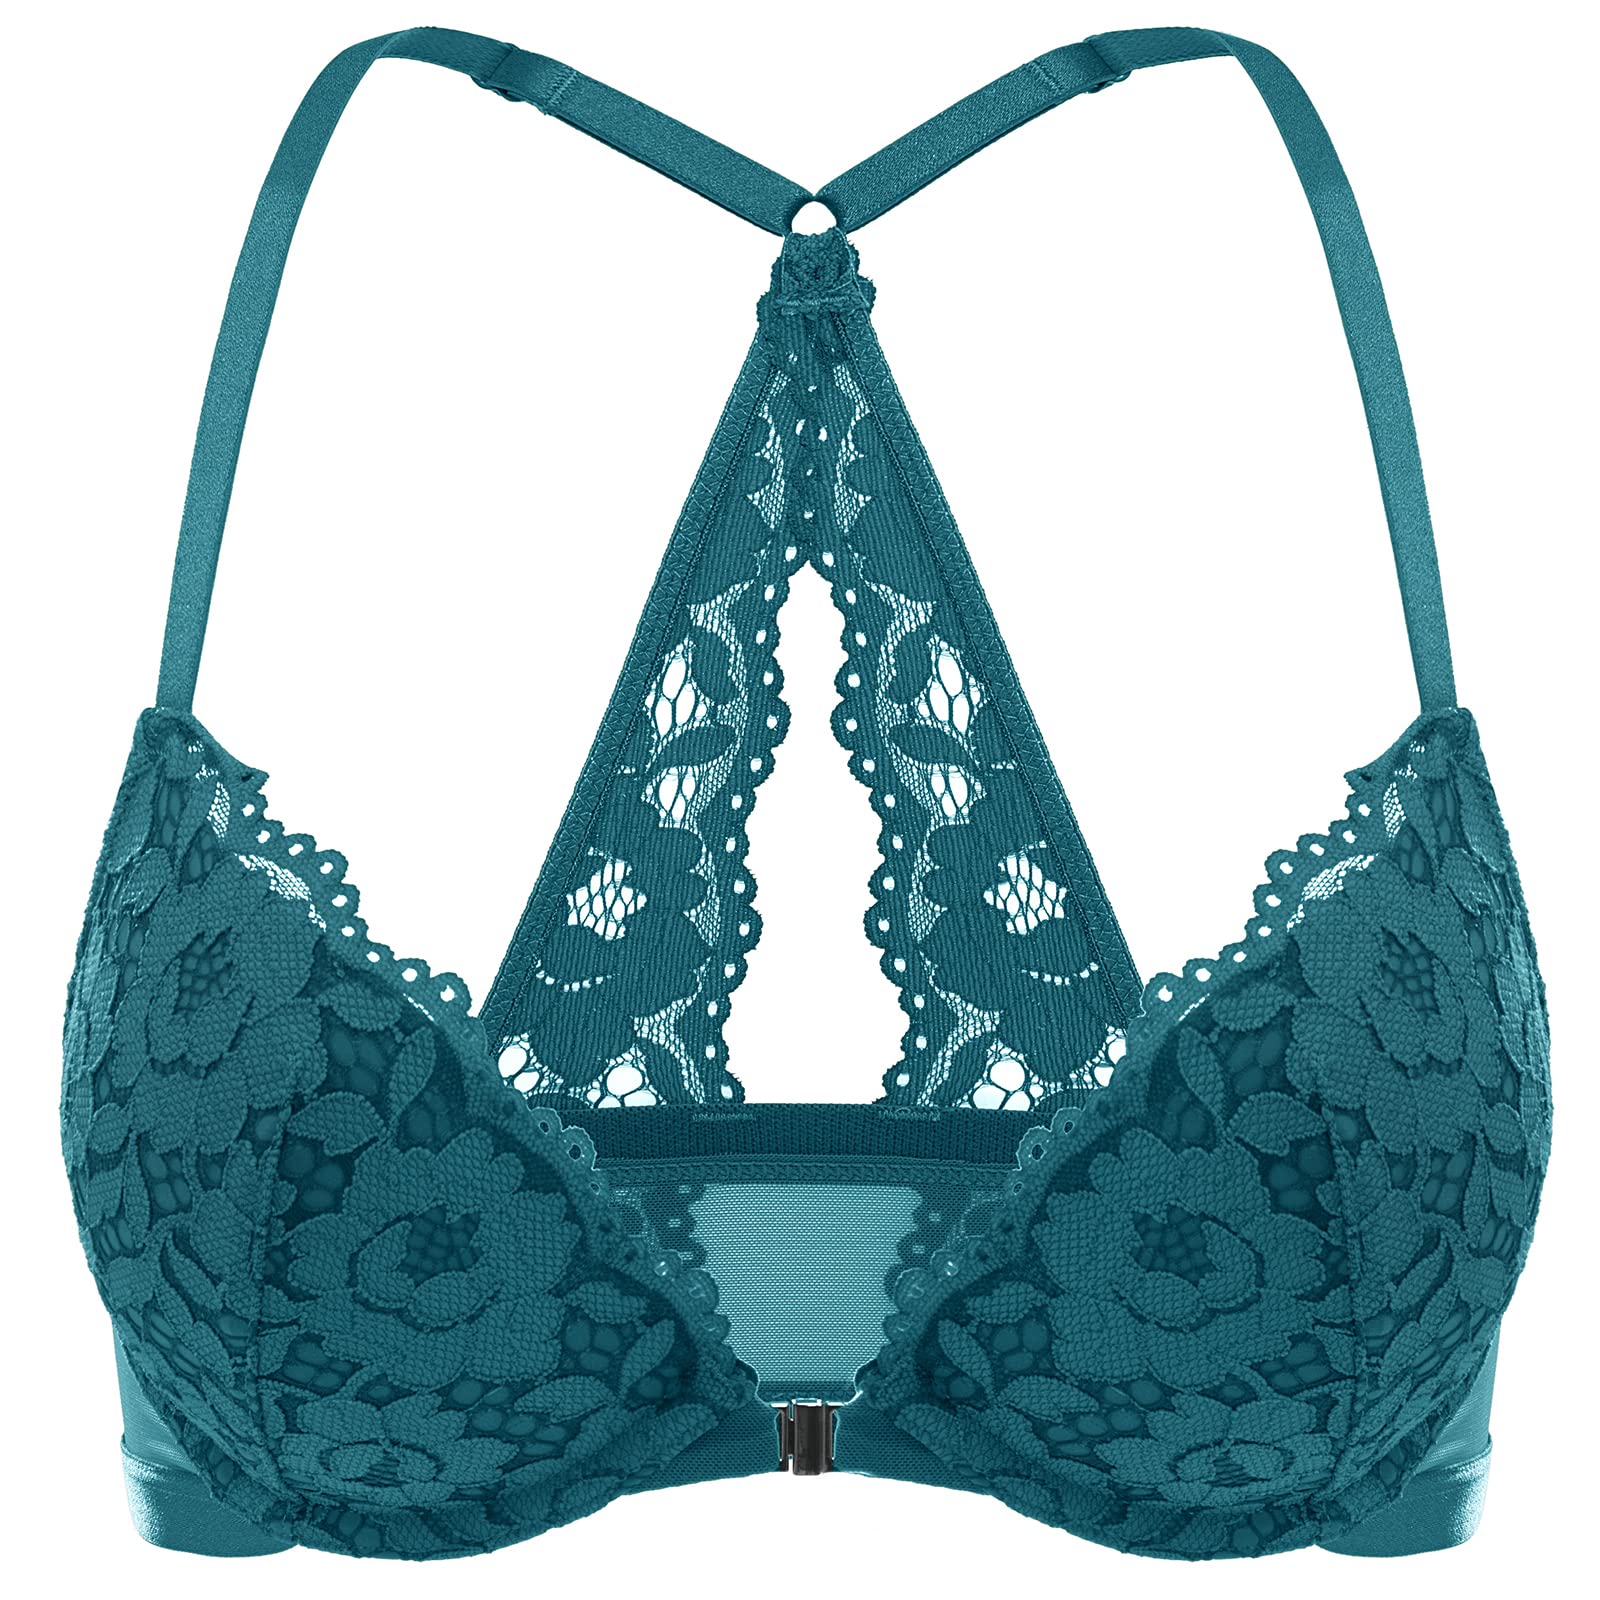 DOBREVA Womens Push Up Bra Racerback Front closure Bras Lace Padded Underwire Plunge Floral Spruce green 32c